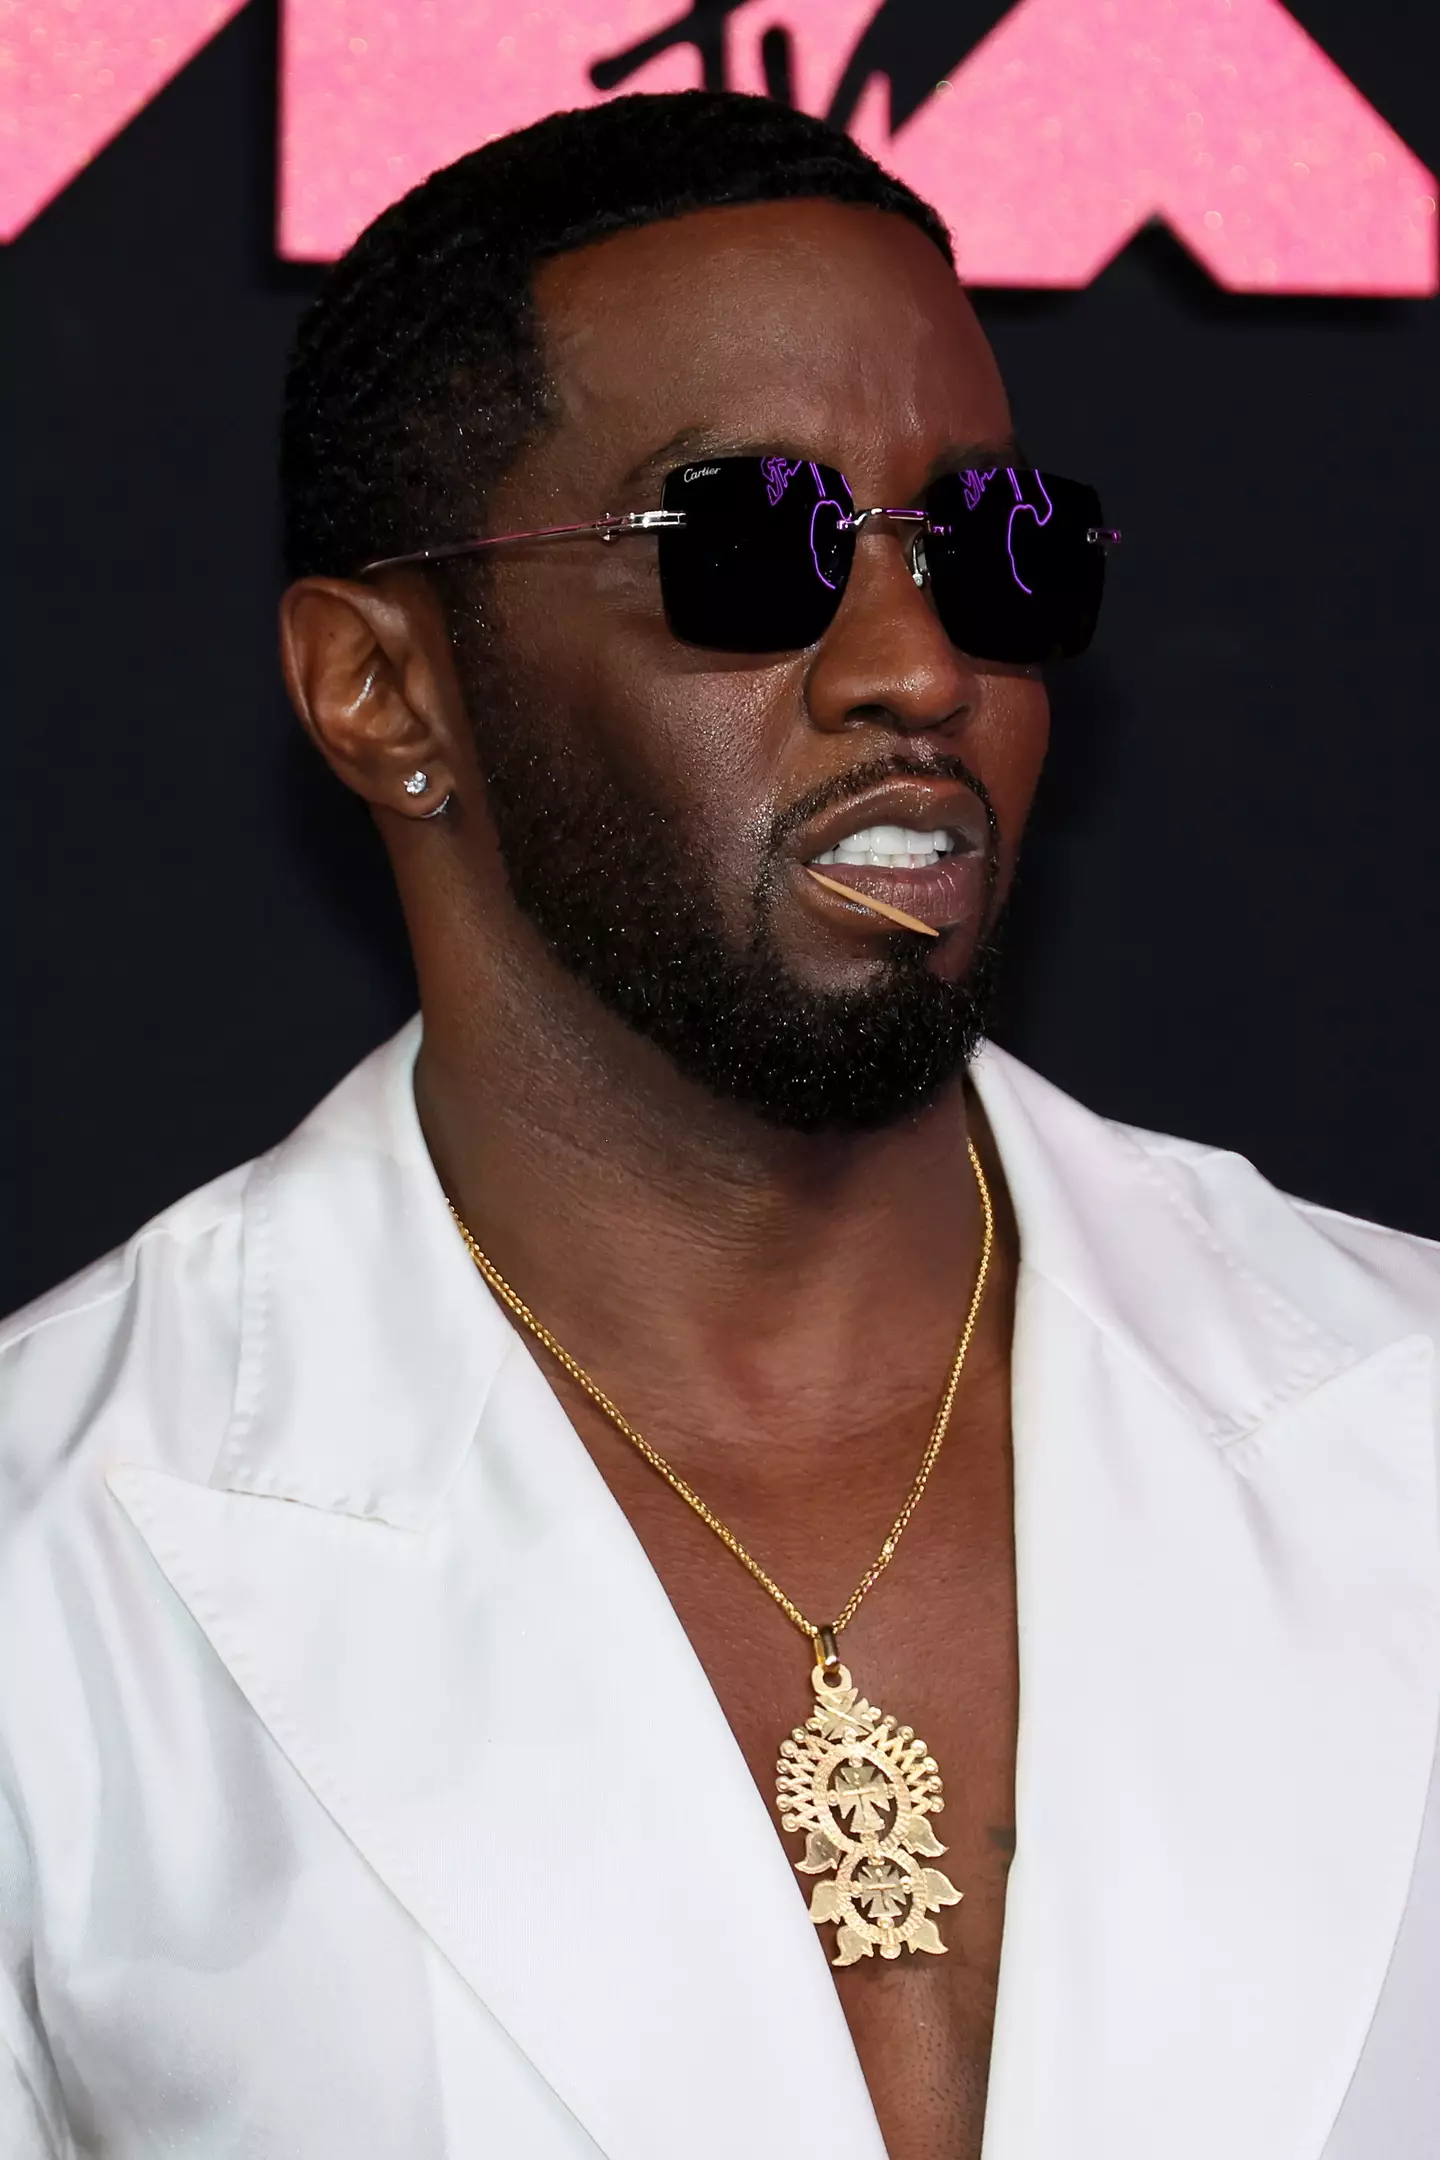 Diddy has faced several lawsuits recently.